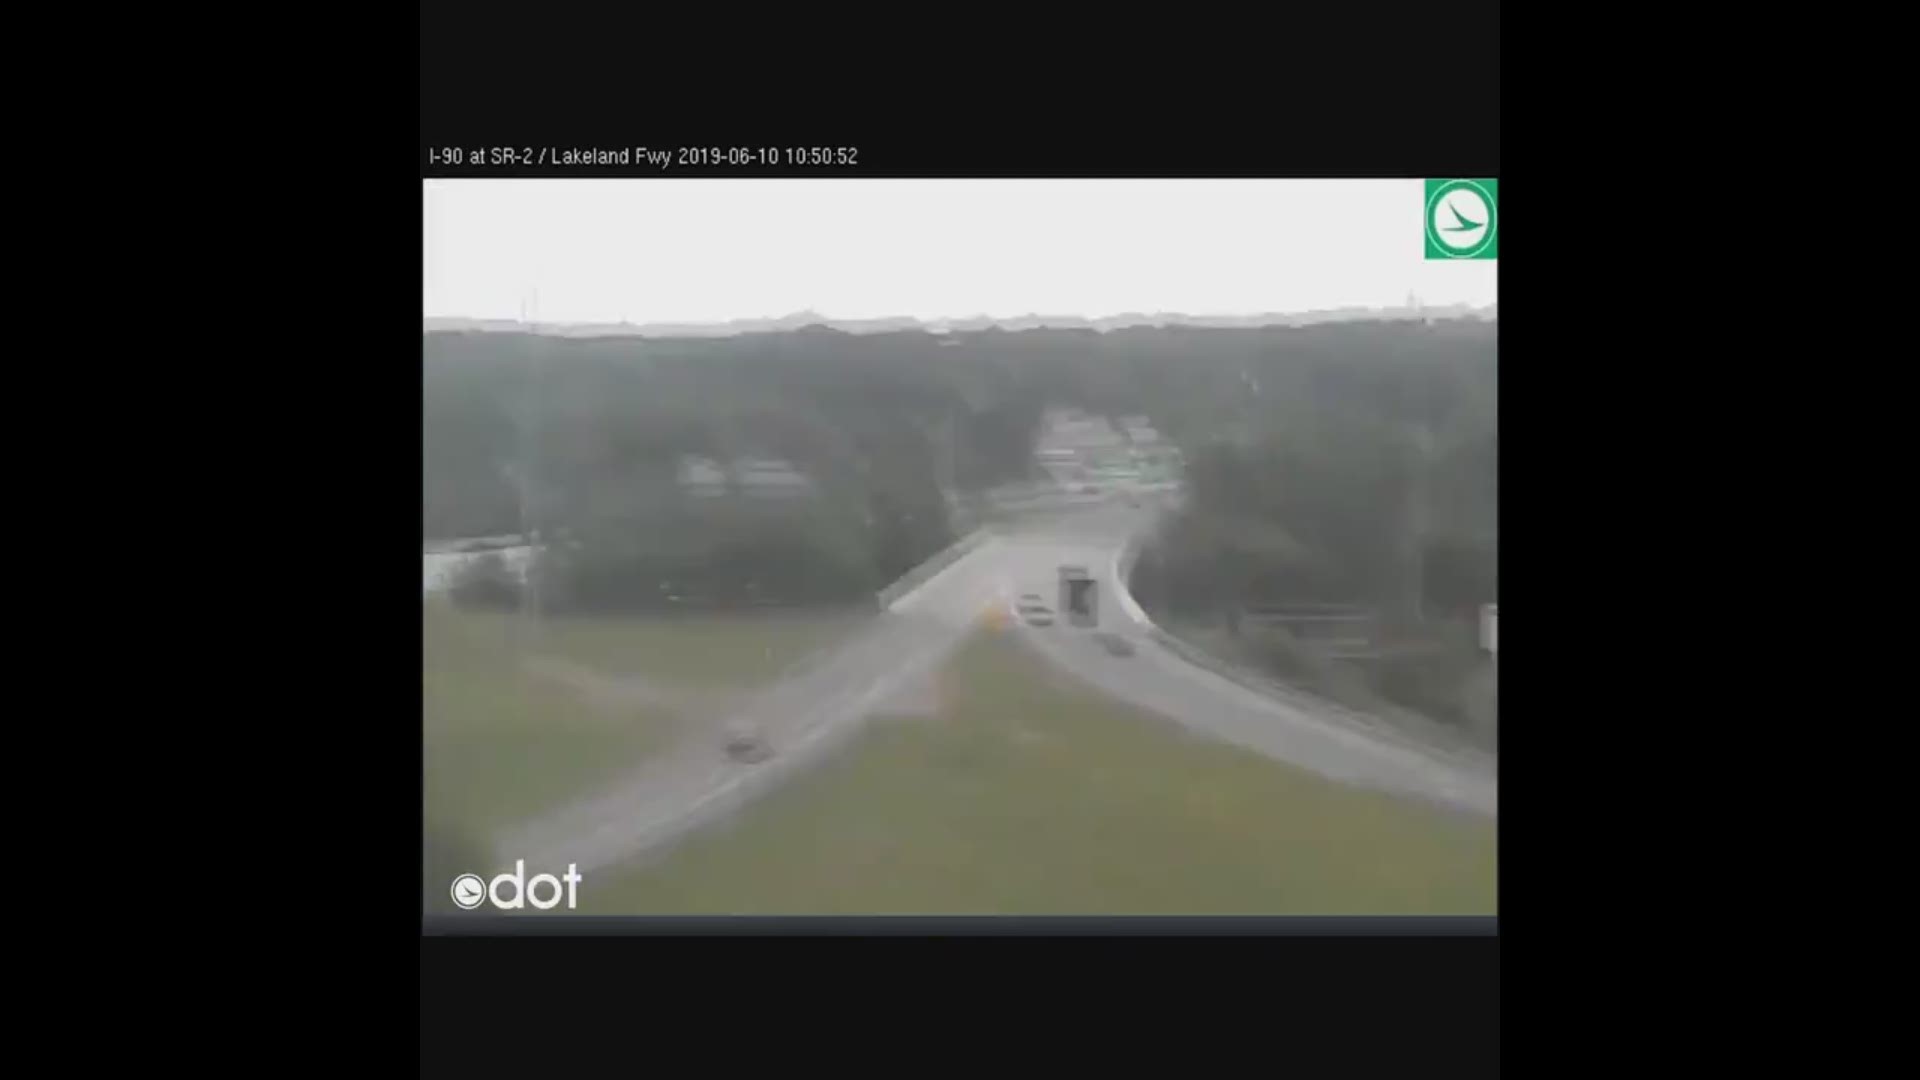 Ohio Dept. of Transportation cameras show the moment a 4.0 earthquake occurred in Eastlake on June 10, 2019. No damage was reported.